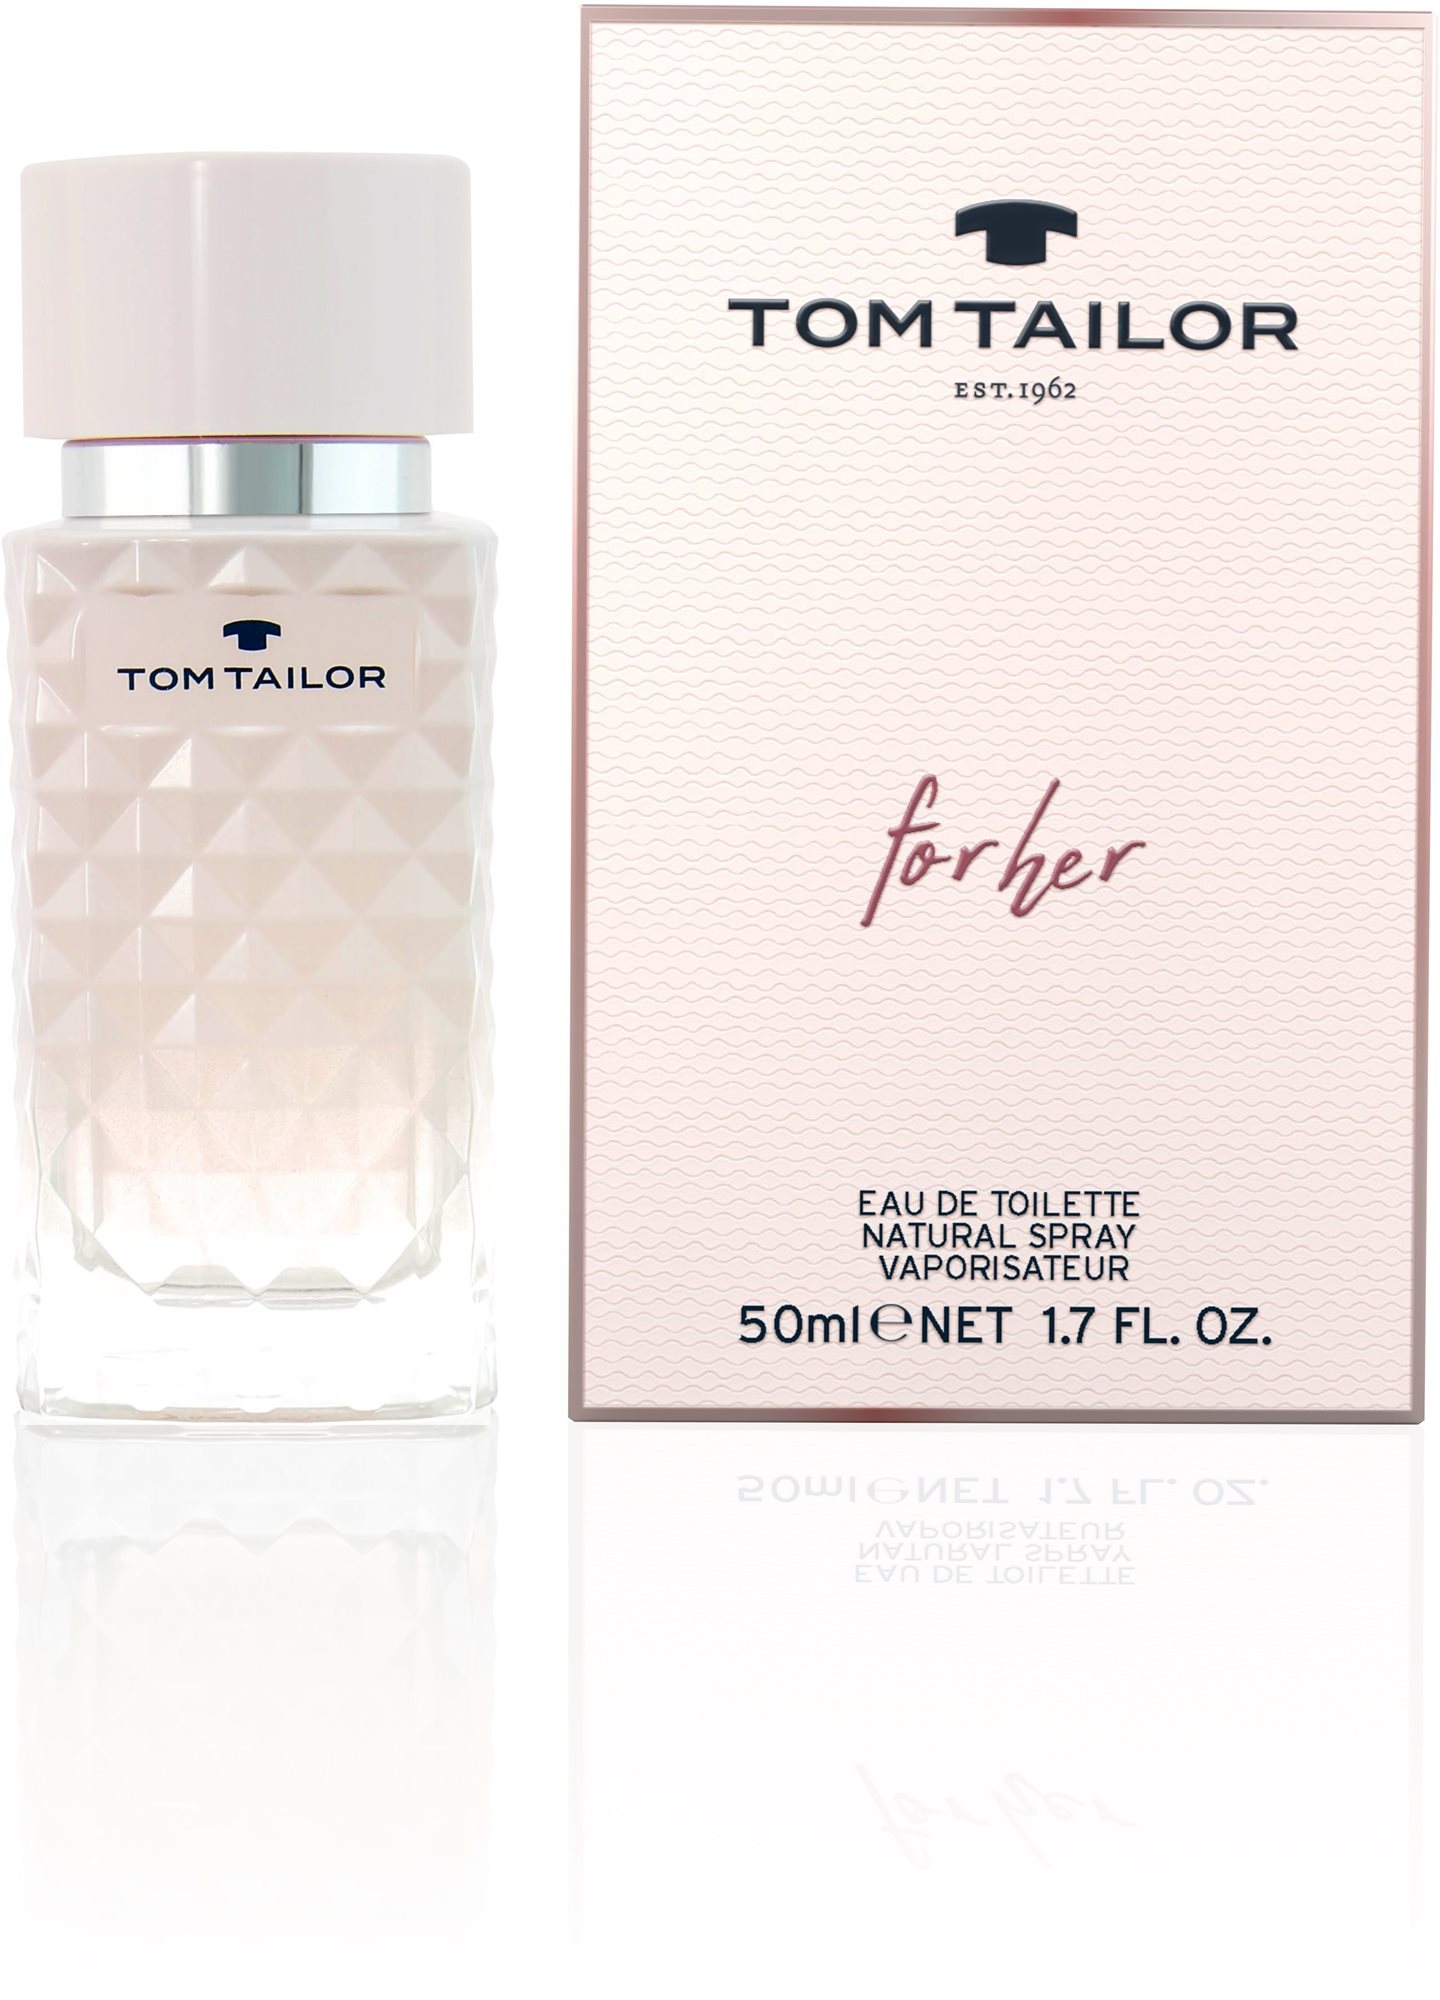 TOM TAILOR For Her EdT